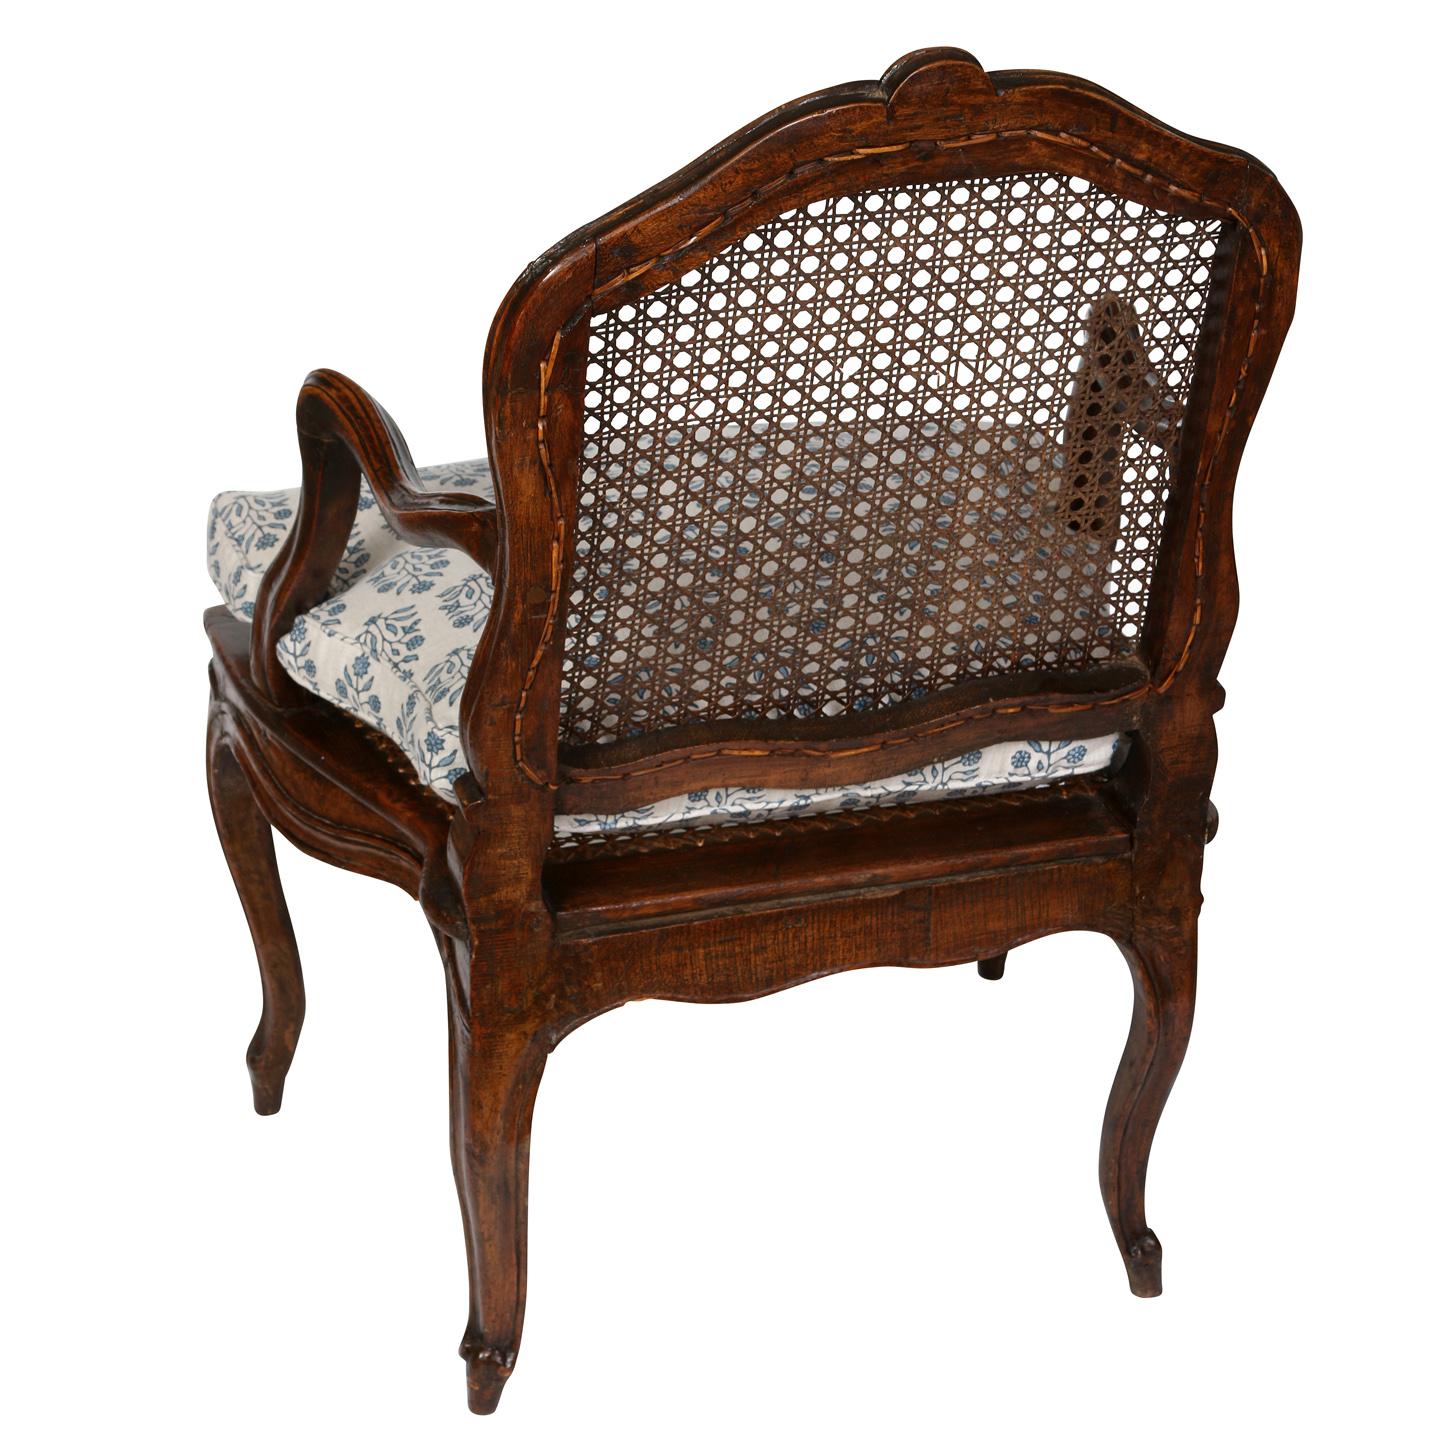 A Louis XV Style Walnut Chair with a Caned Back and Seat In Good Condition For Sale In New York, NY